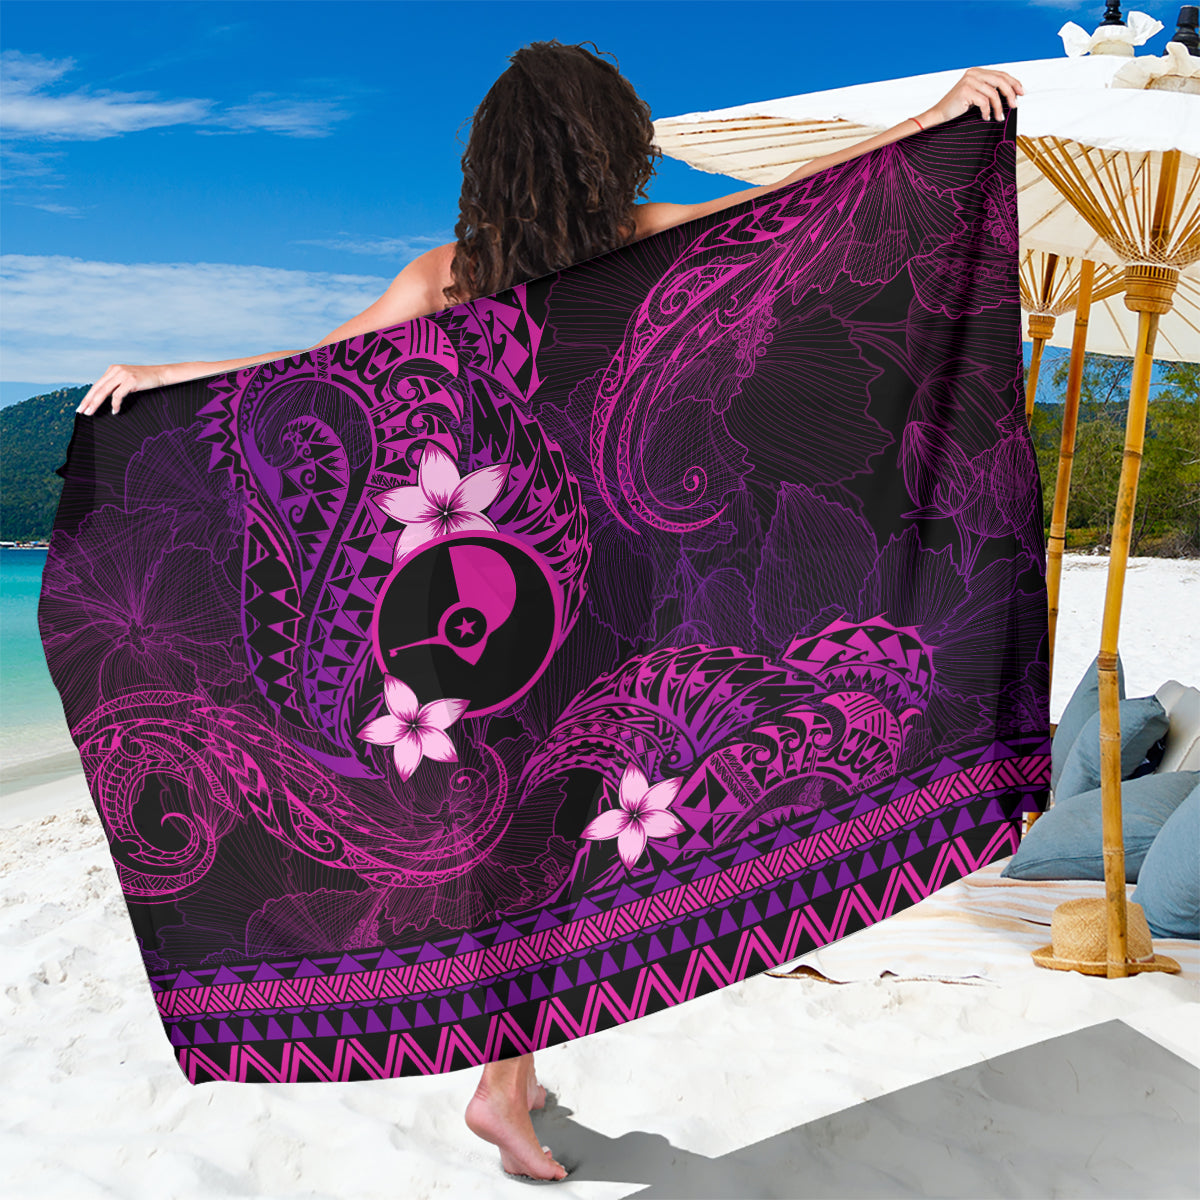 FSM Yap State Sarong Tribal Pattern Pink Version LT01 One Size 44 x 66 inches Pink - Polynesian Pride